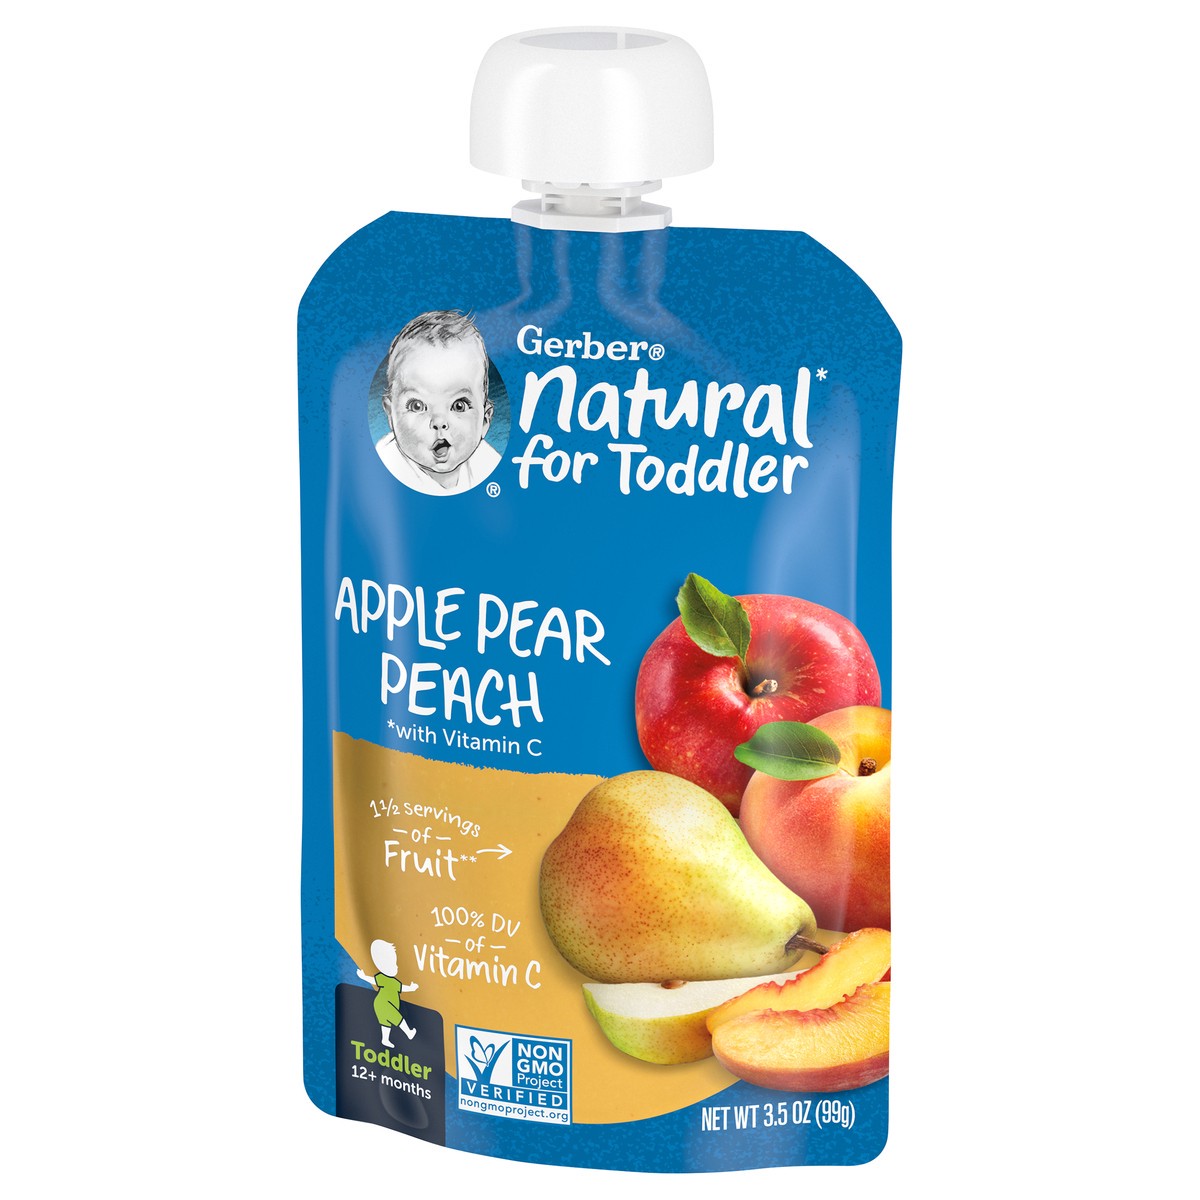 slide 9 of 9, Gerber Natural for Toddler, Apple Pear Peach Toddler Pouch, 3.5 oz Pouch, 3.5 oz